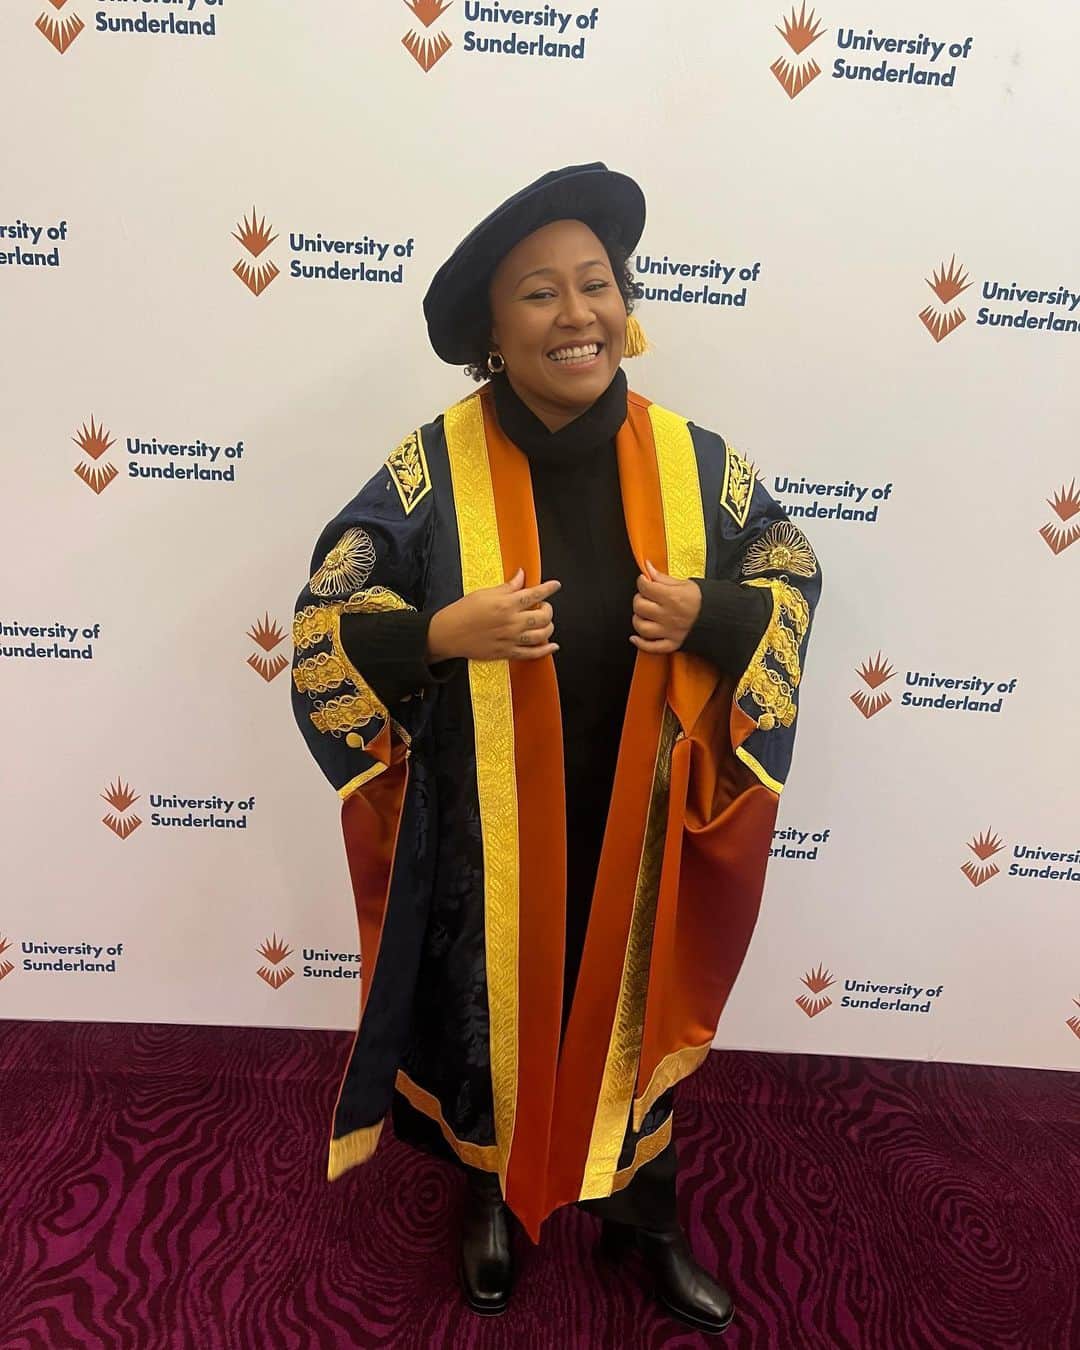 Emeli Sandéのインスタグラム：「I have had an incredible 4 years as chancellor of @sunderlanduni , it’s been a great honour to represent such a brilliant, inclusive, progressive university.   It was an emotional day today, wearing the gown for the final time at my last graduation. I am so touched to have received an honorary doctorate in music from your wonderful university. It was hard to hold back the tears! Thank you!!   Thank you so much to Vice Chancellor Sir David Bell and all the staff and governors at Sunderland University for the unforgettable memories and for all the inspiration you have given me in these four years. I am deeply grateful to have been given the chance to play a role in your powerful legacy.   To all the students I have met over the years, it has been a privilege to be your chancellor, I’m incredibly proud of all your achievements, especially in facing the many obstacles the recent years have brought. Shine bright and I hope you remember your time at @sunderlanduni with great happiness, I certainly will!   Congratulations to Leanne Cahill the new Chancellor! It was a pleasure to meet you today, wishing you a wonderful journey ahead!」